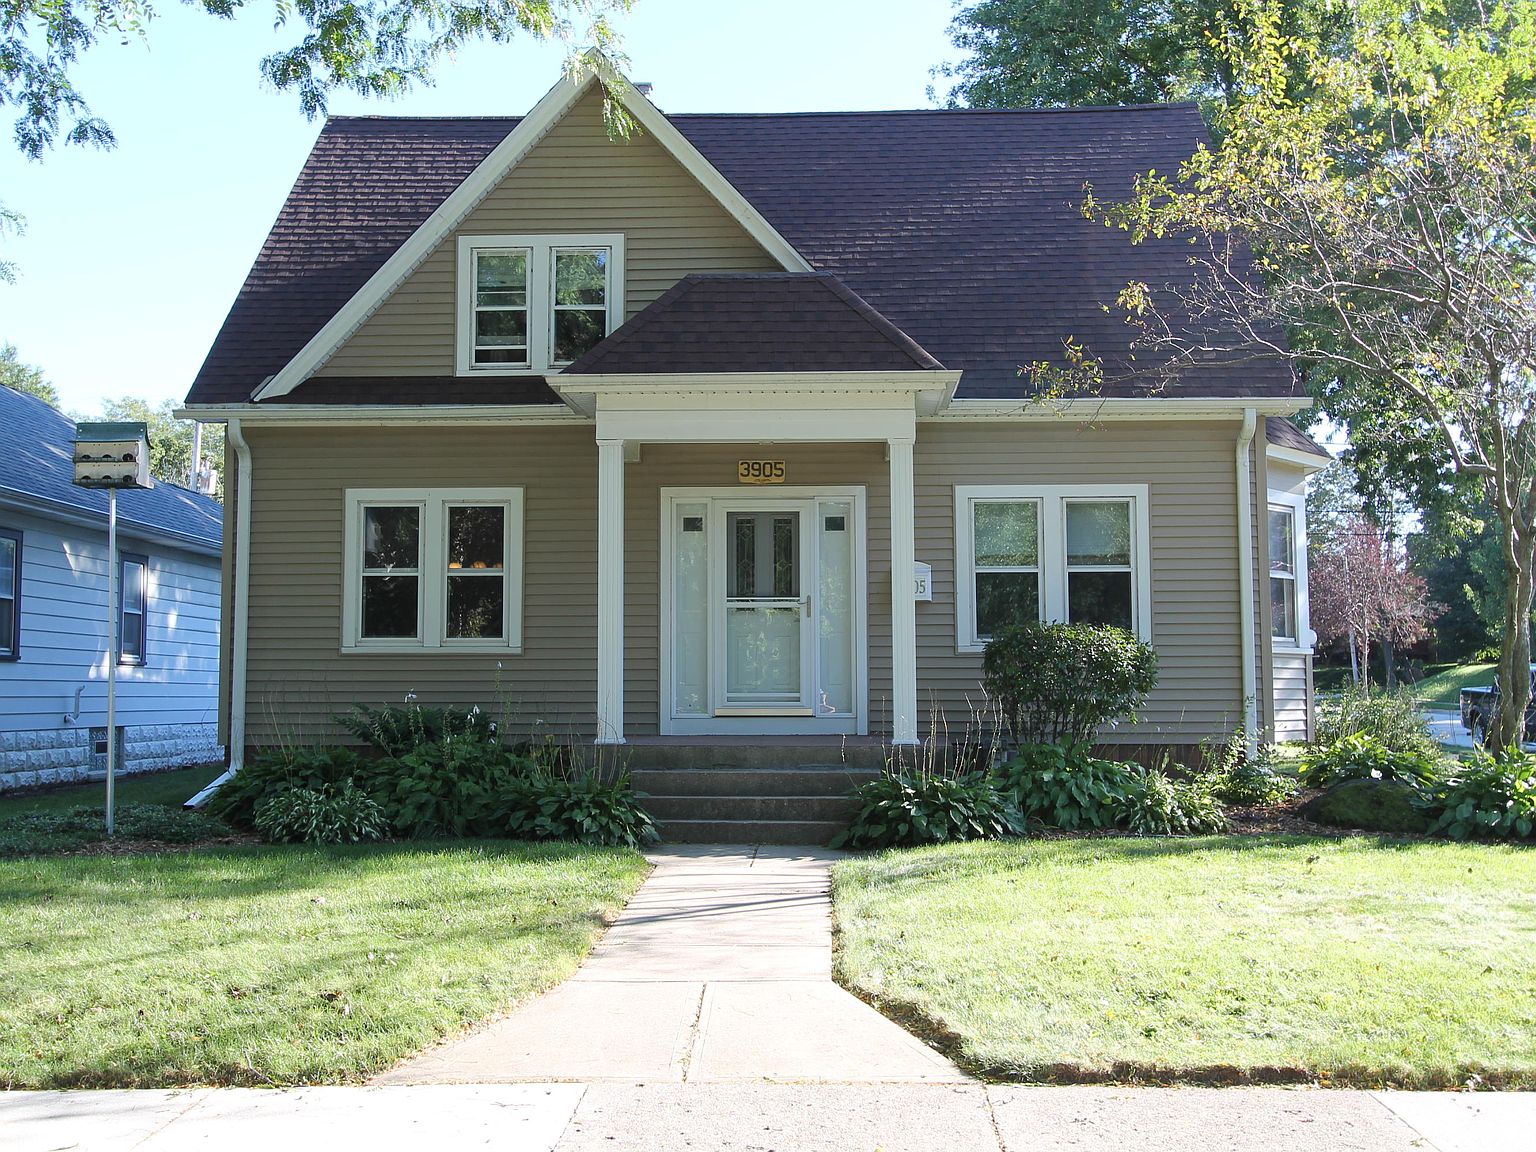 3905 E Allerton Ave, Cudahy, WI 53110 | Zillow